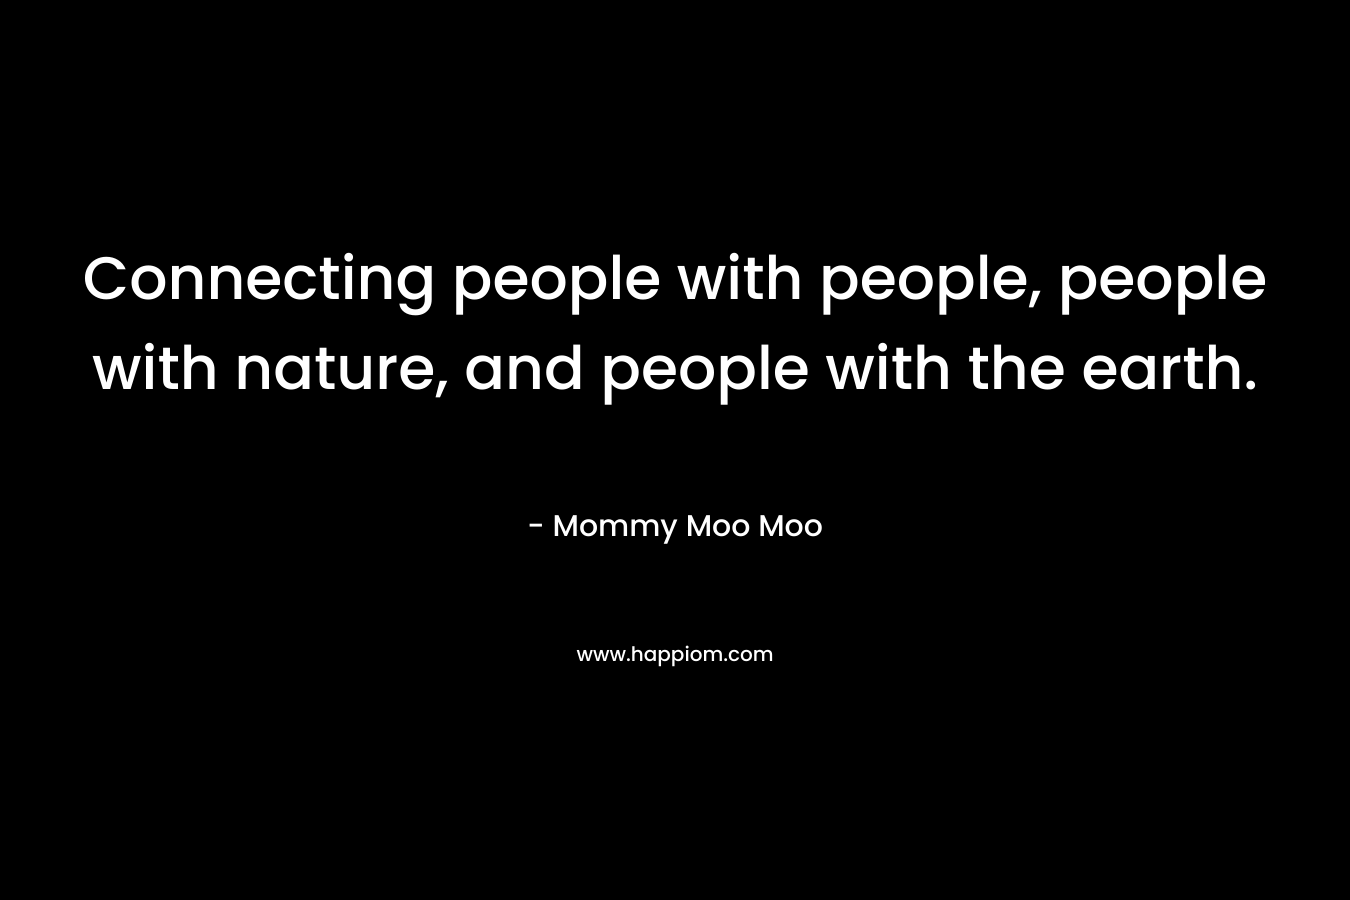 Connecting people with people, people with nature, and people with the earth.